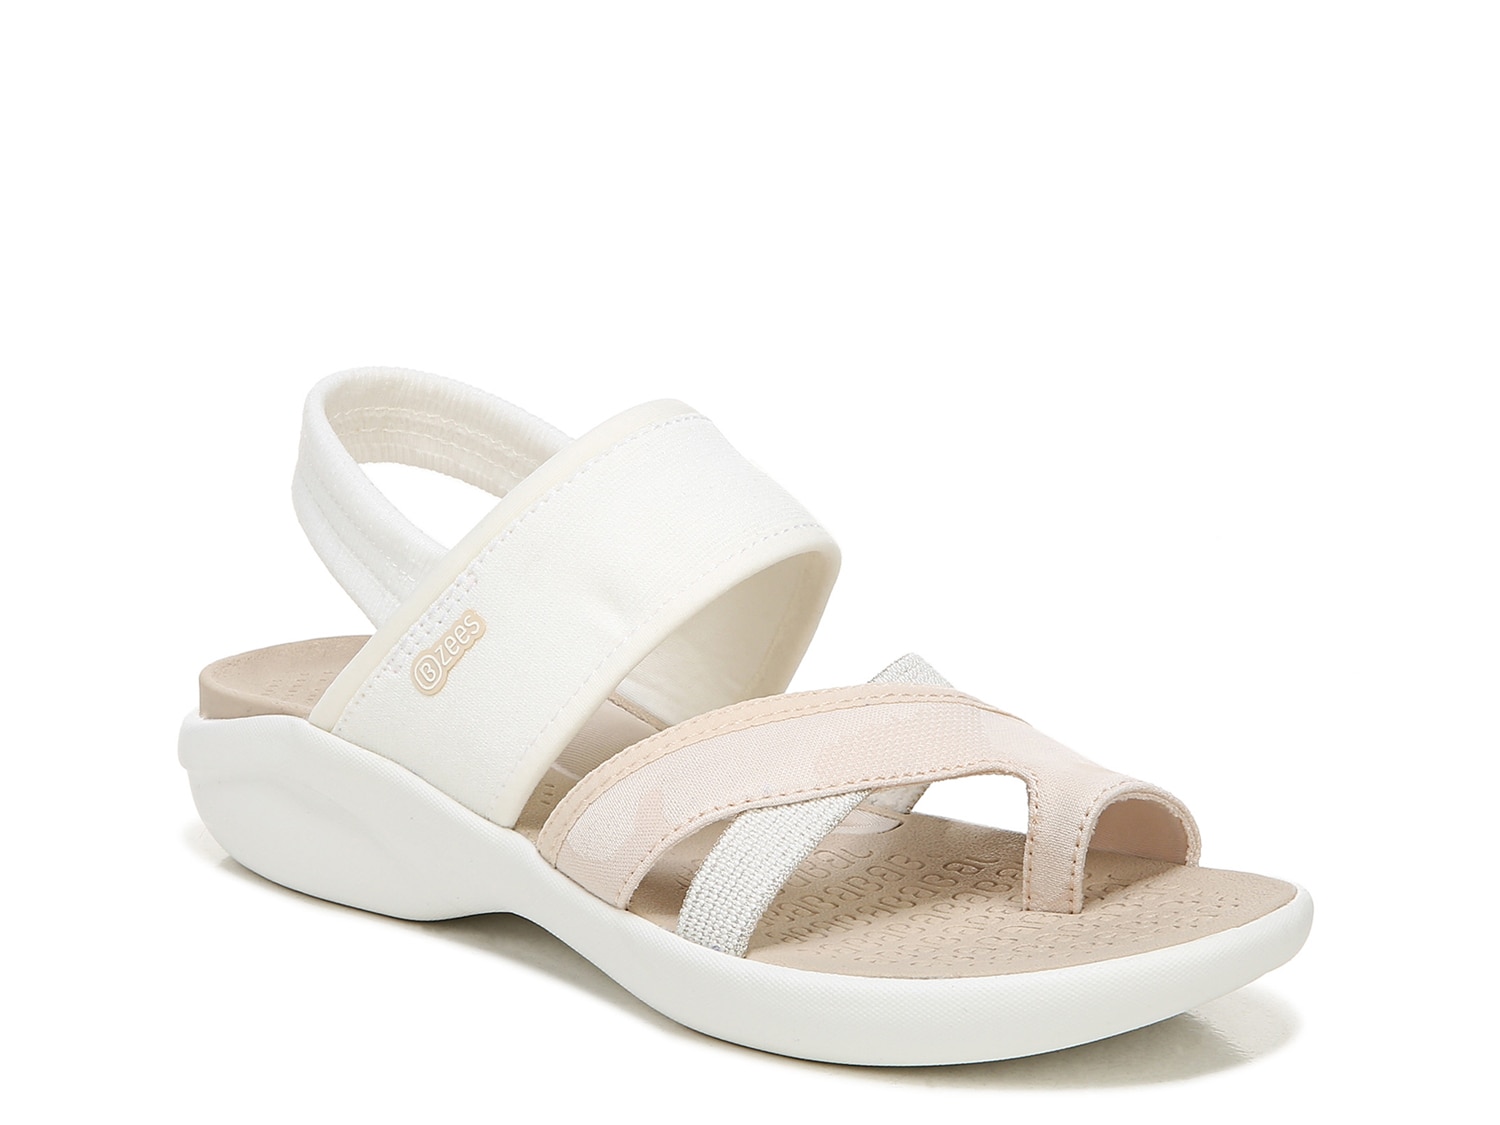 BZees Call Me Sandal - Free Shipping | DSW